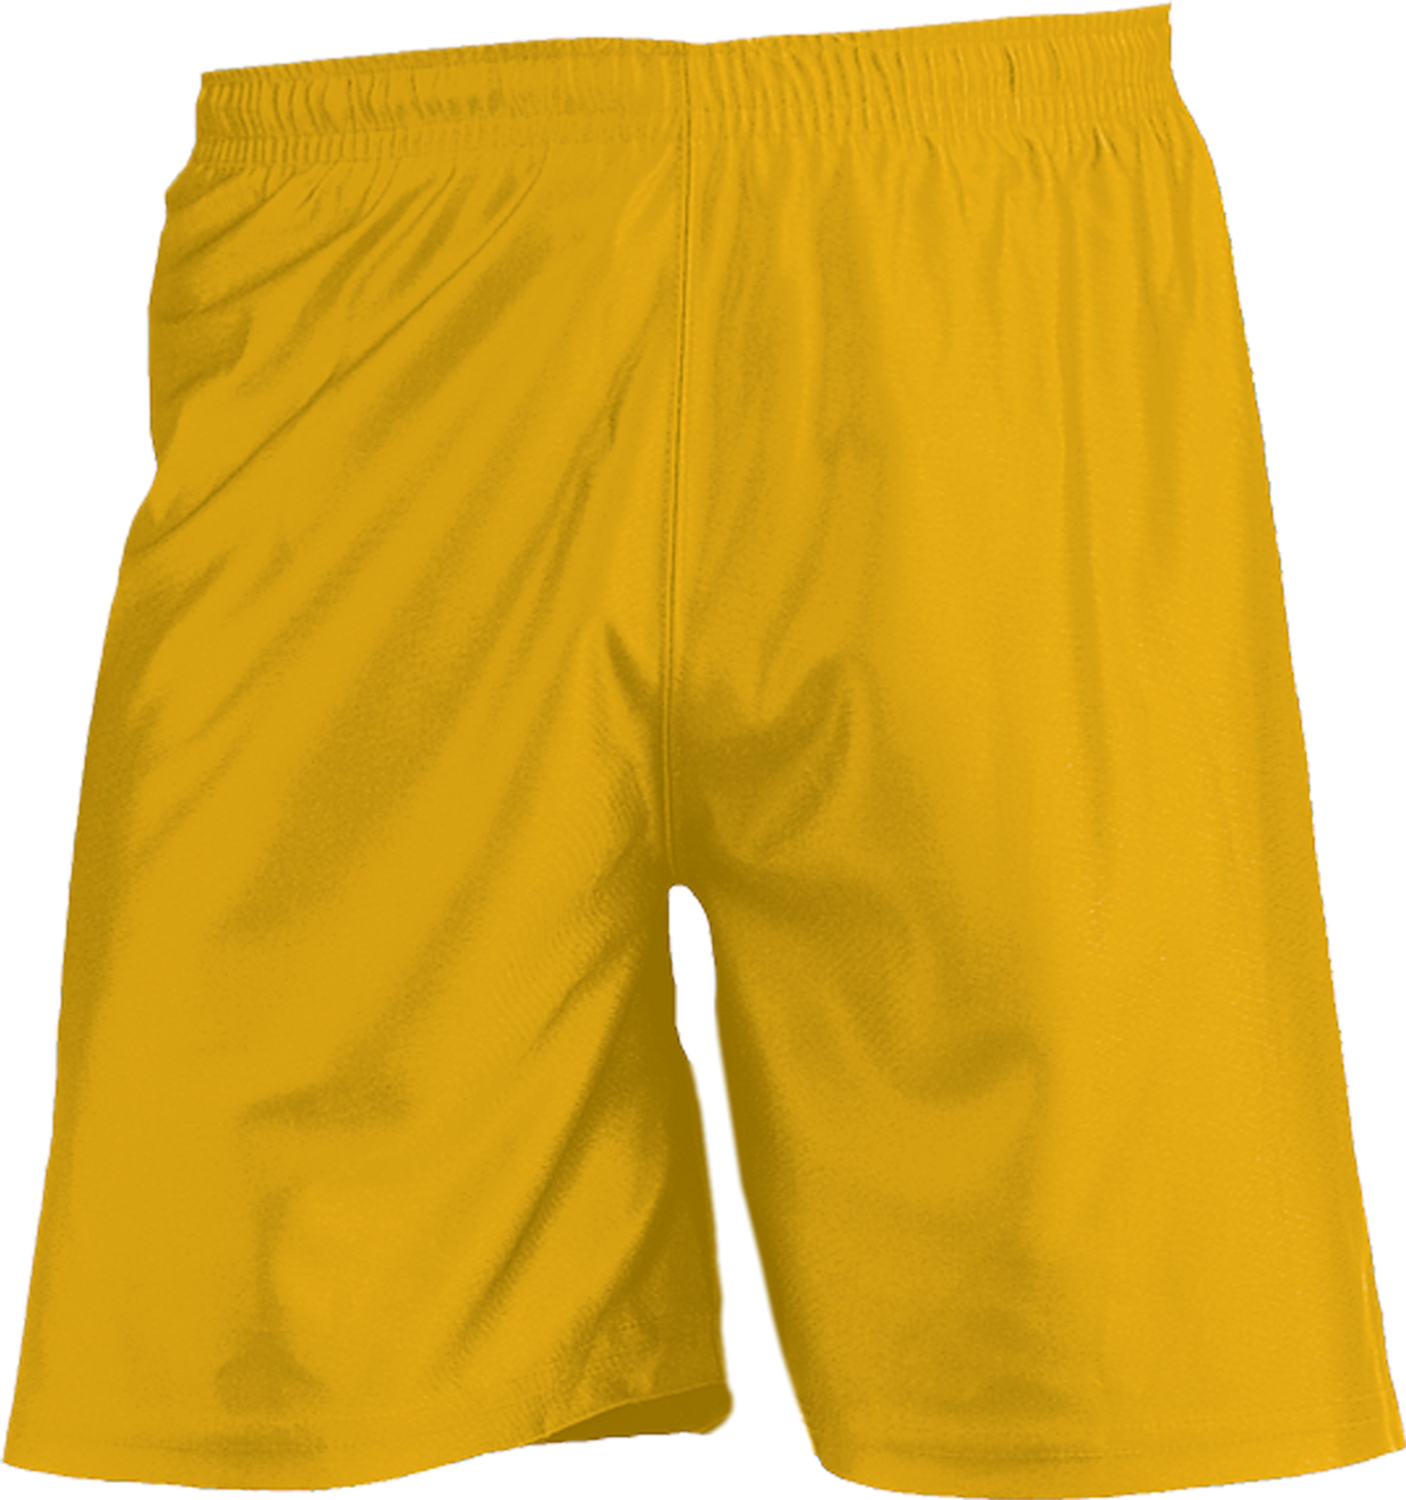 APEY Shorts For Men - Basketball Running Gym Shorts - Zip Pockets - Yellow, Shop Today. Get it Tomorrow!